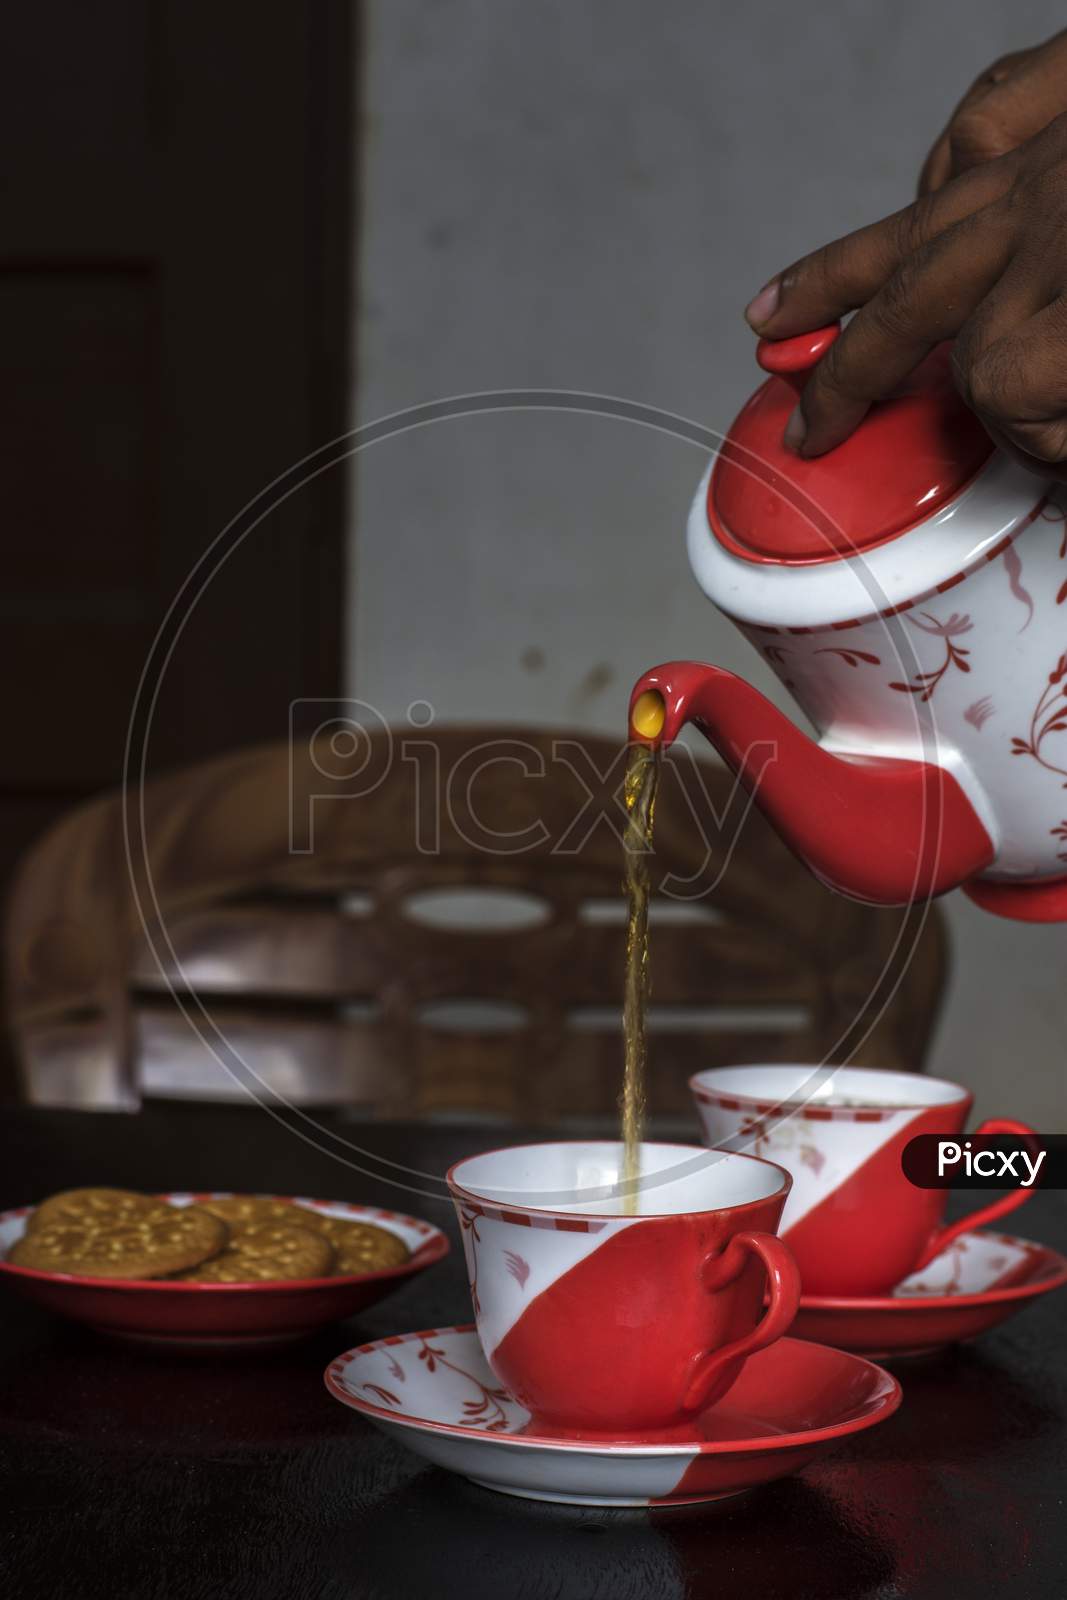 Pouring Tea Into Ceramic Cup On A Wooden Table With Some Biscuit On Plate.